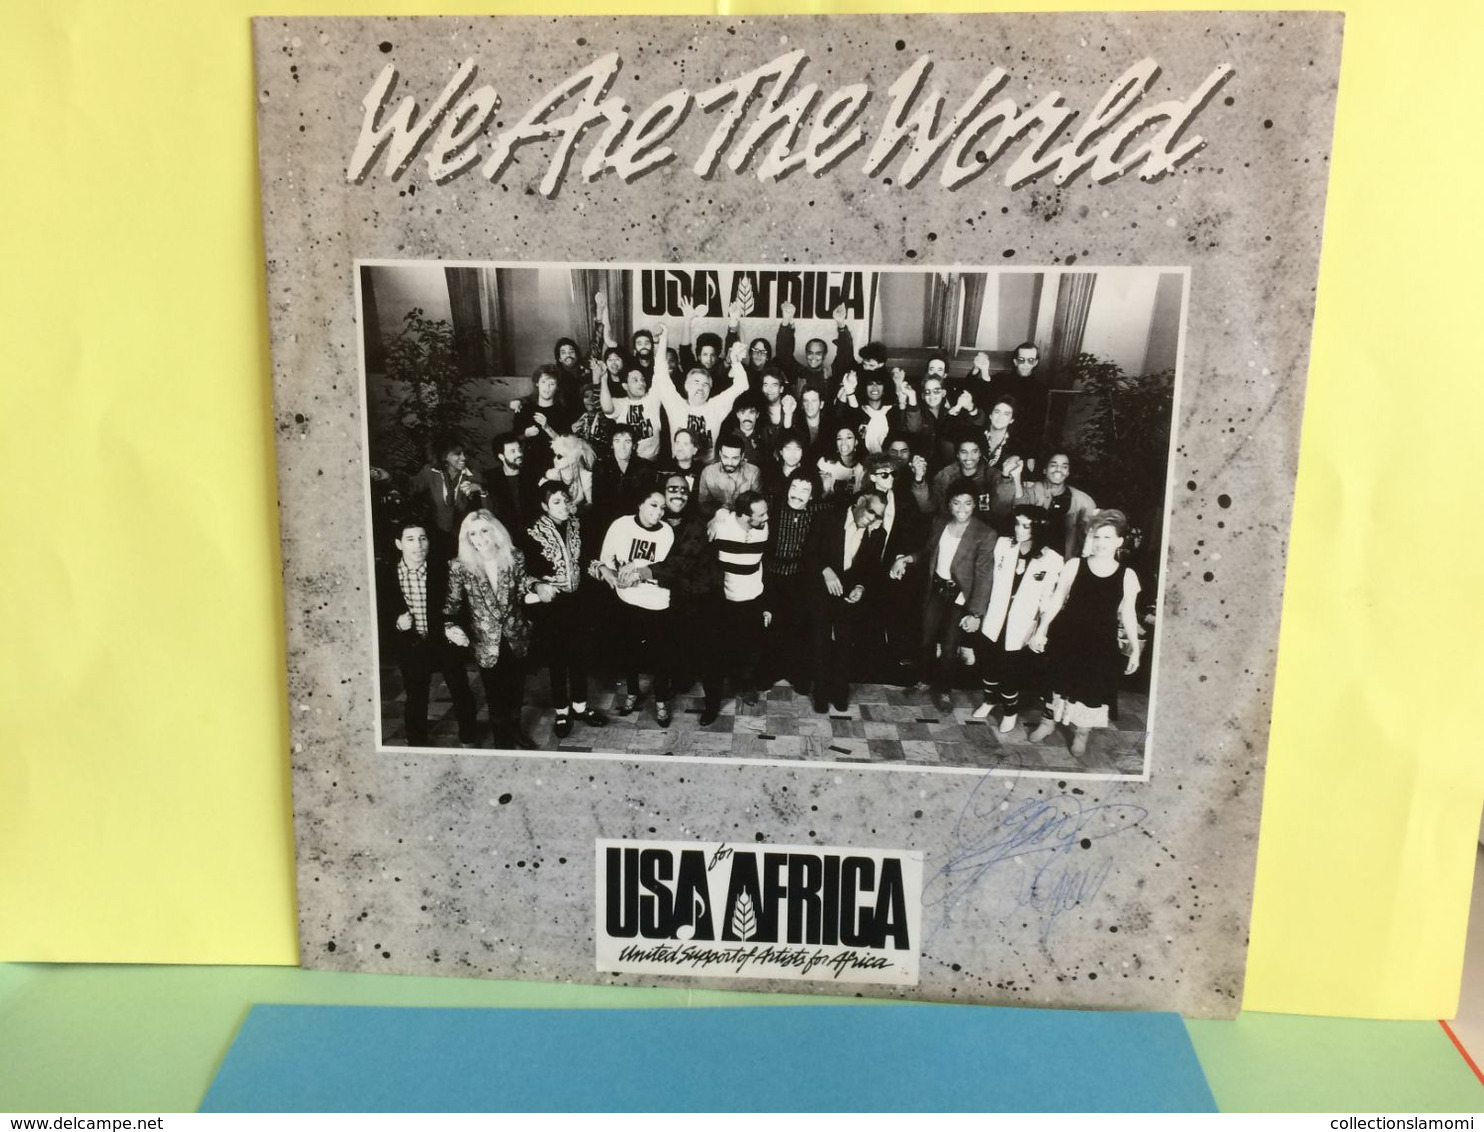 Compilations USA for Africa- Disque vinyles 33T) Titres voir photos-  (Muller Dom-Cat) - We  arz the World